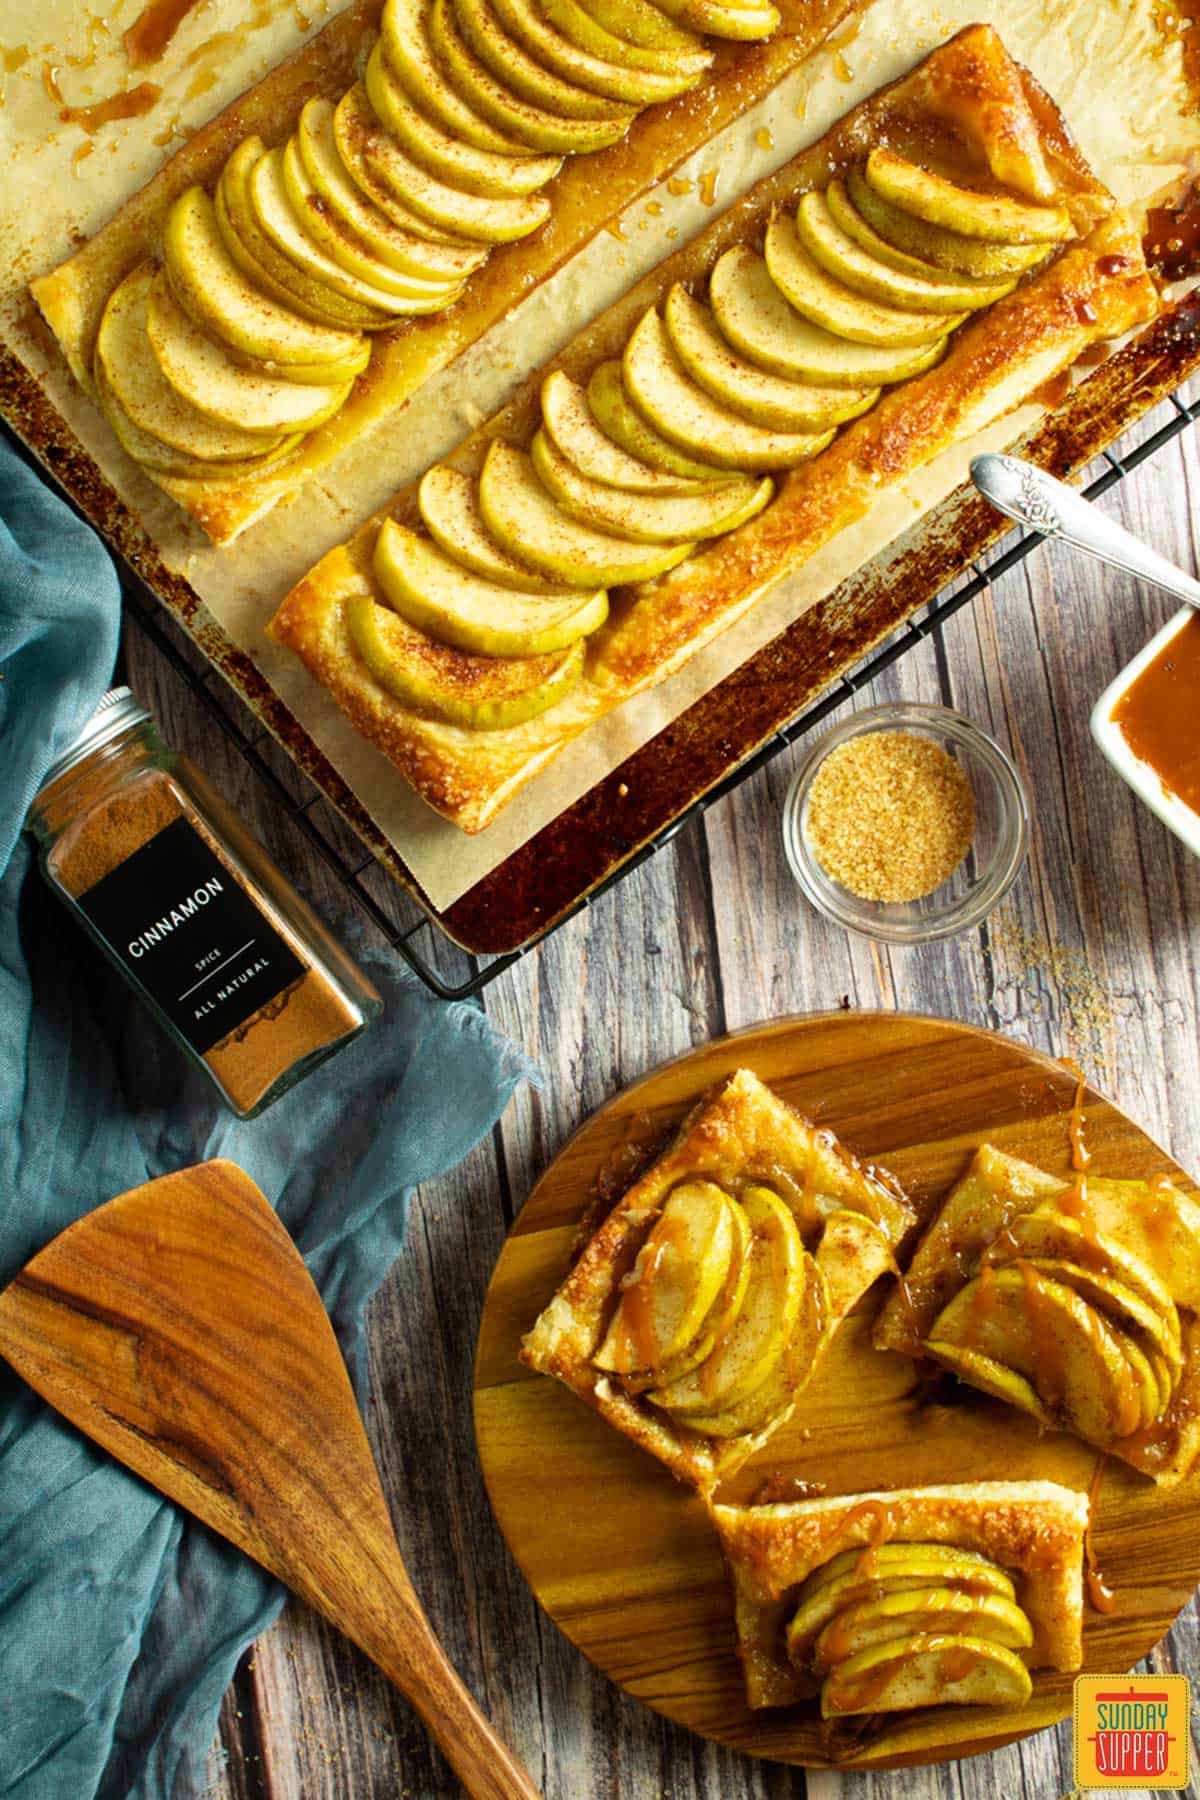 a top view of a baking sheet with two apple tarts and a cutting board with a sliced apple tart, with cinnamon, sugar and a spoon on the table